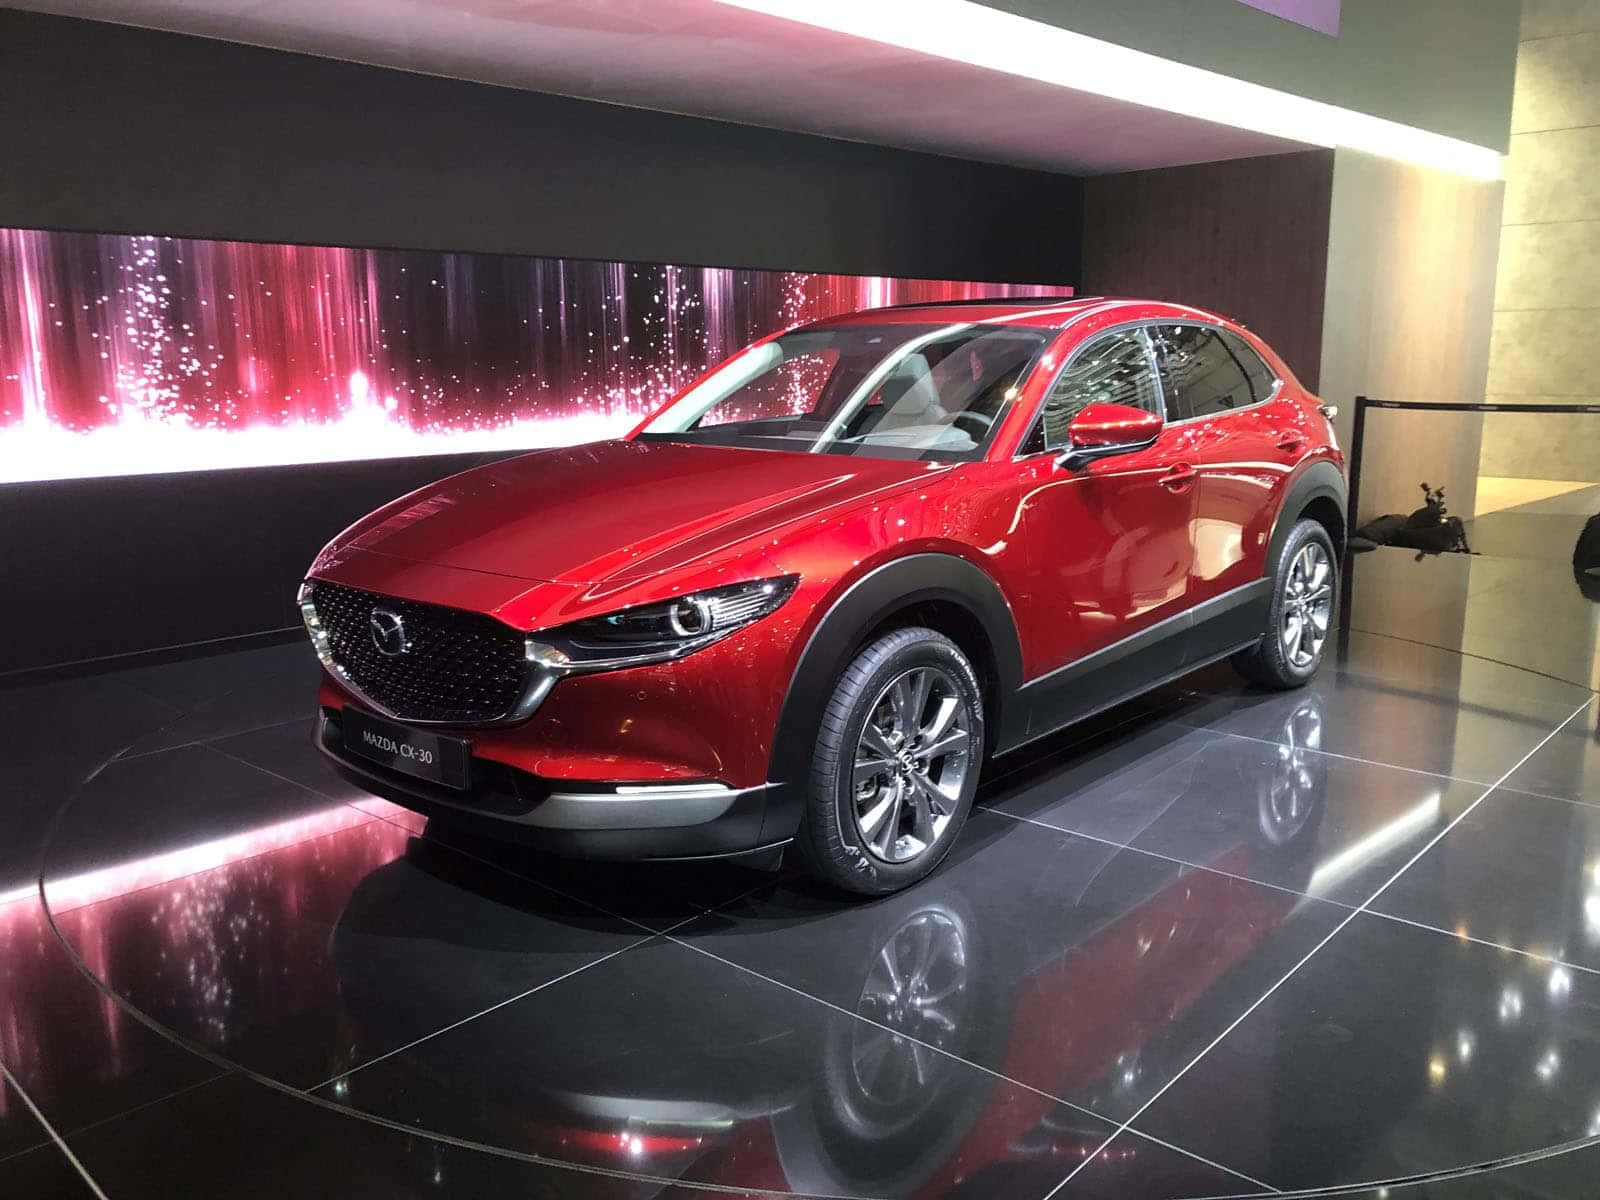 Sleek and Stylish Mazda CX-30 in Action Wallpaper